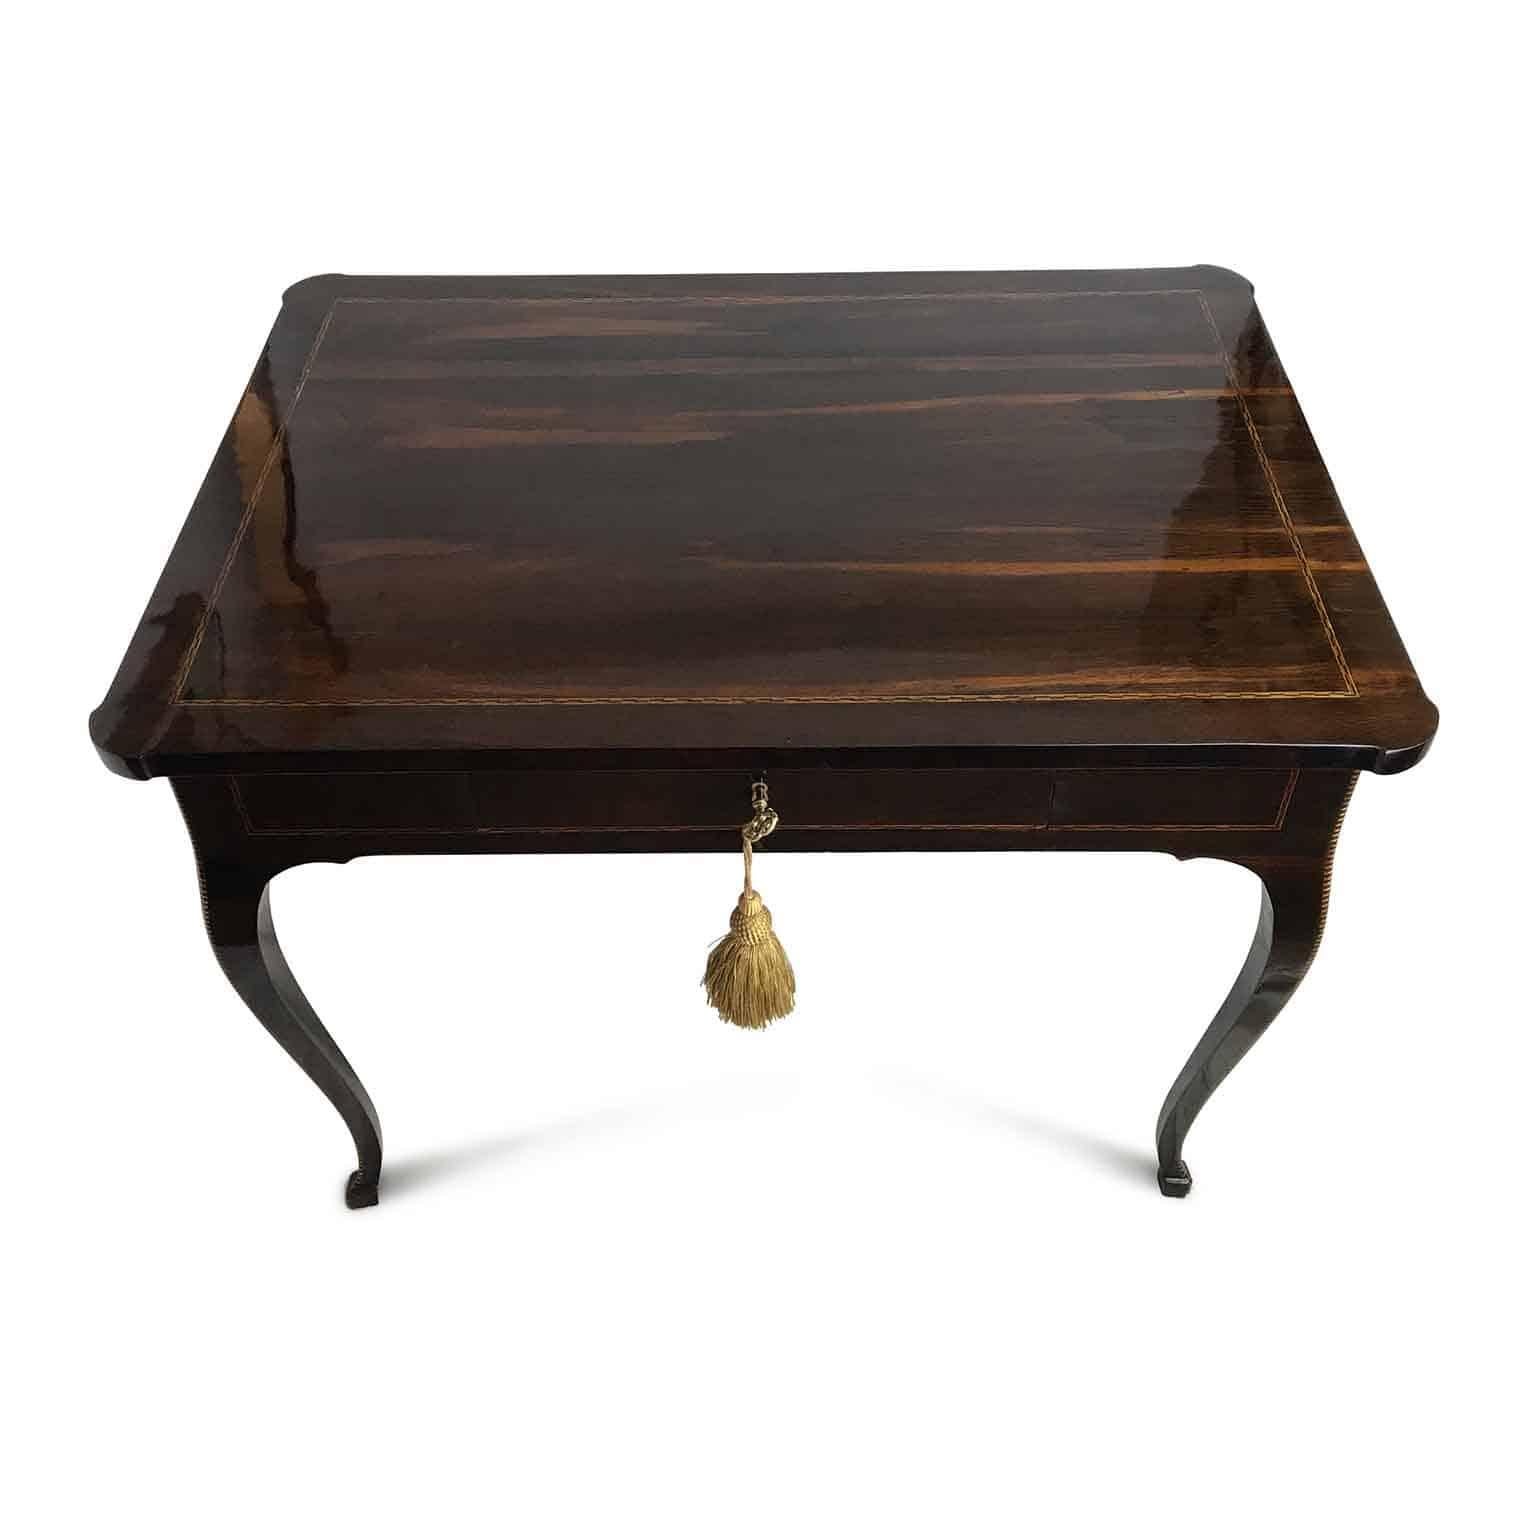 18th Century Italian Louis XV Writing Table Inlaid Rosewood Center Desk For Sale 1